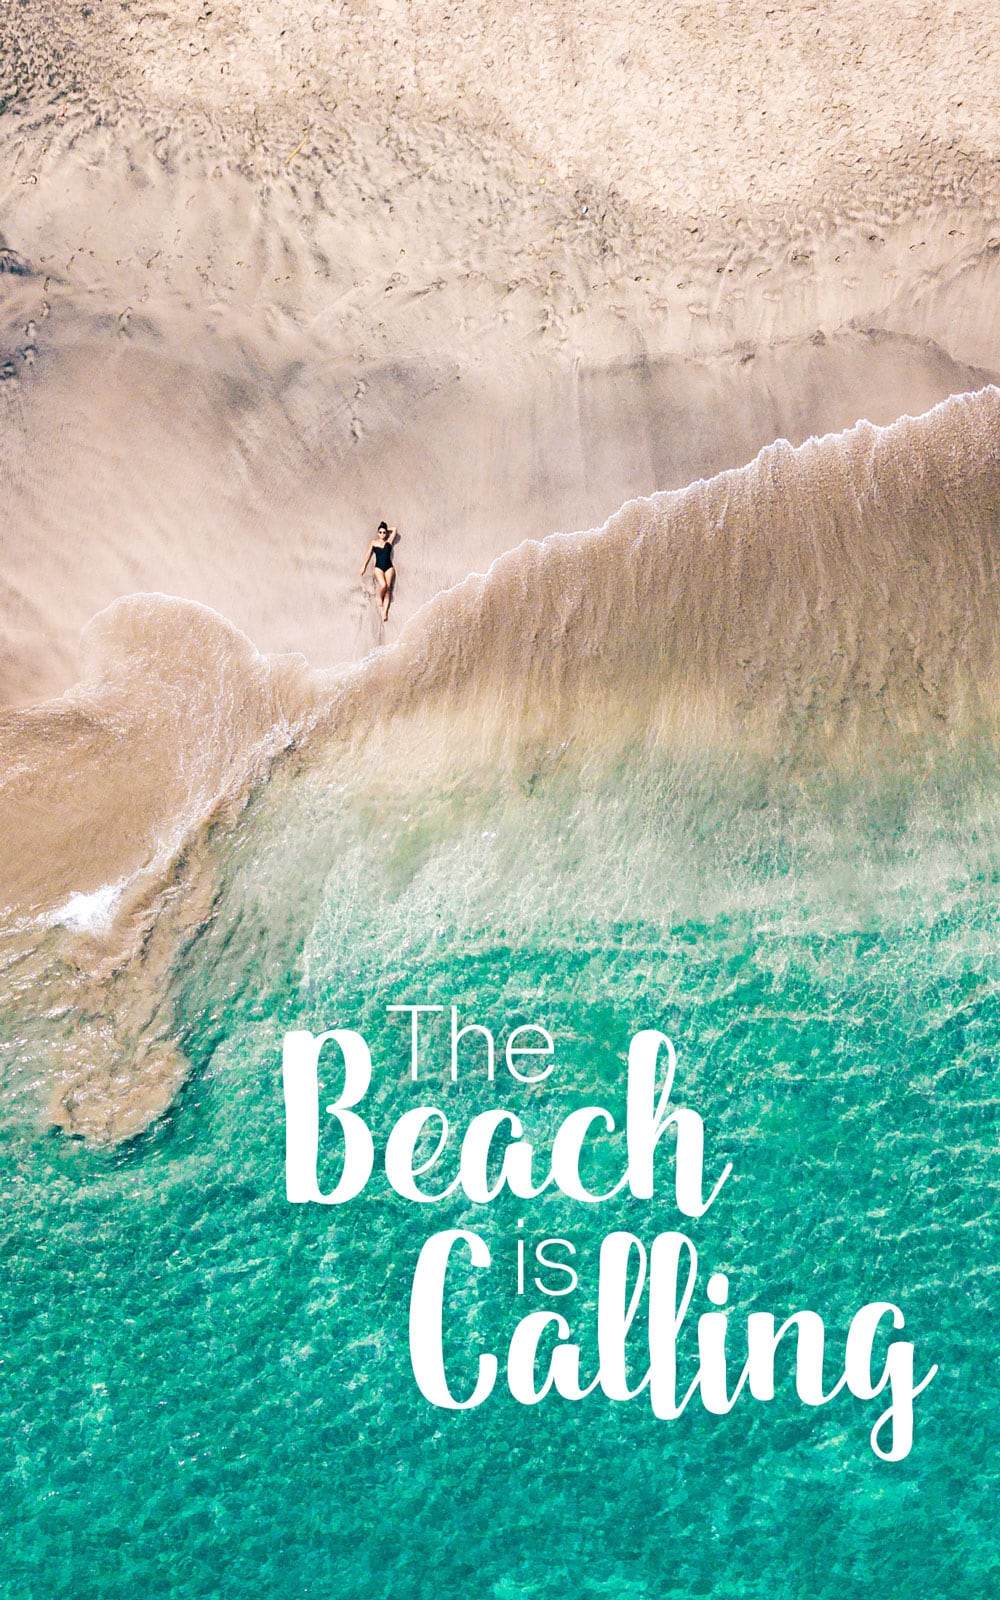 Short Beach Quotes for Inspo